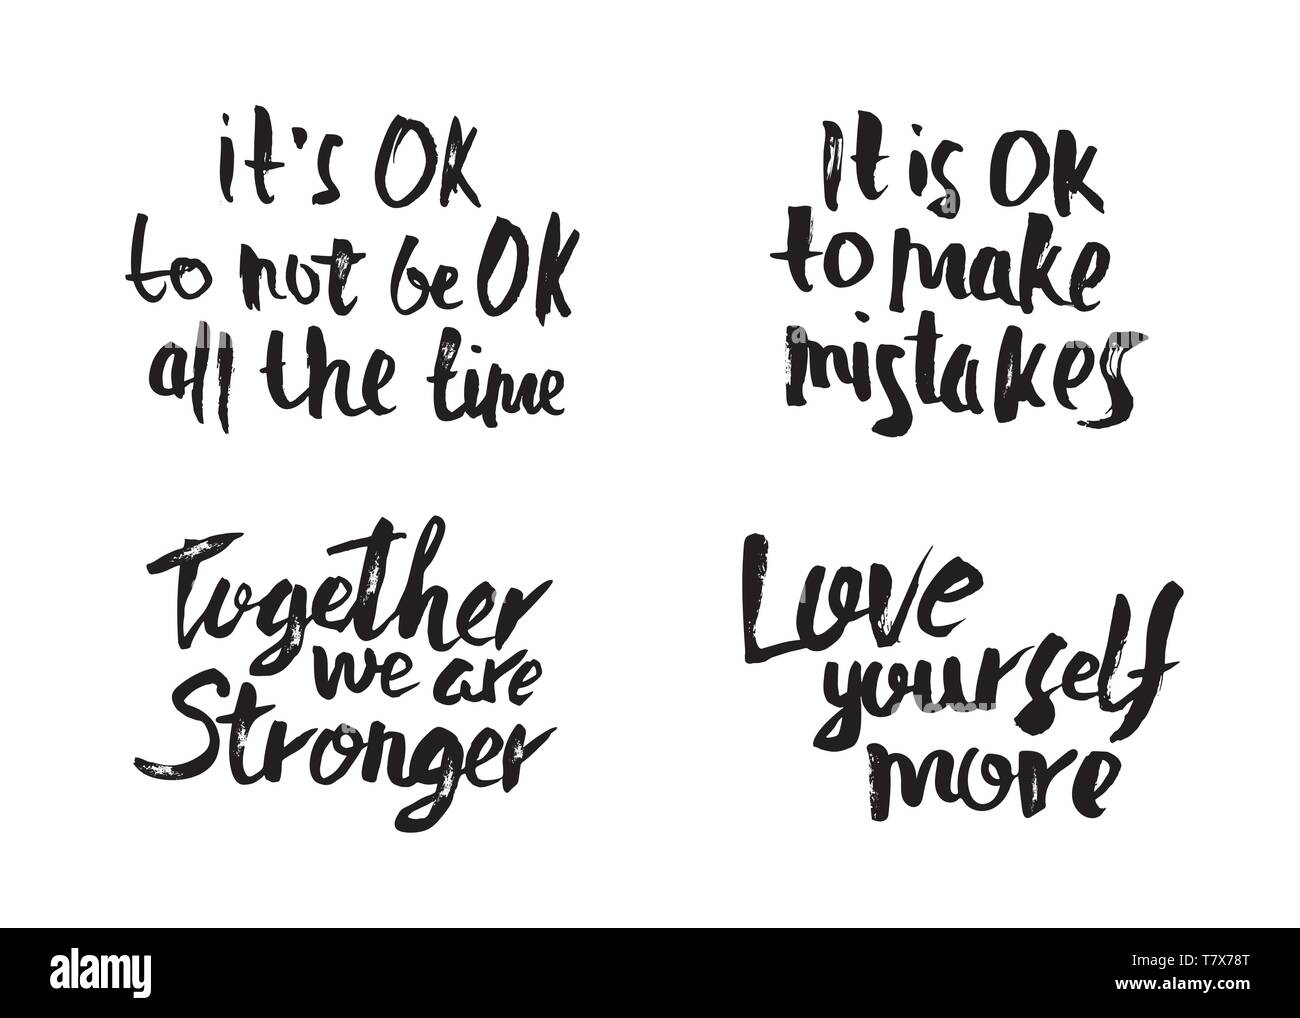 Love yourself more. It's Ok to not be all the time.  It's Ok to make mistakes. Together we are stronger. Set of vector handwritten motivation quotes.  Stock Vector